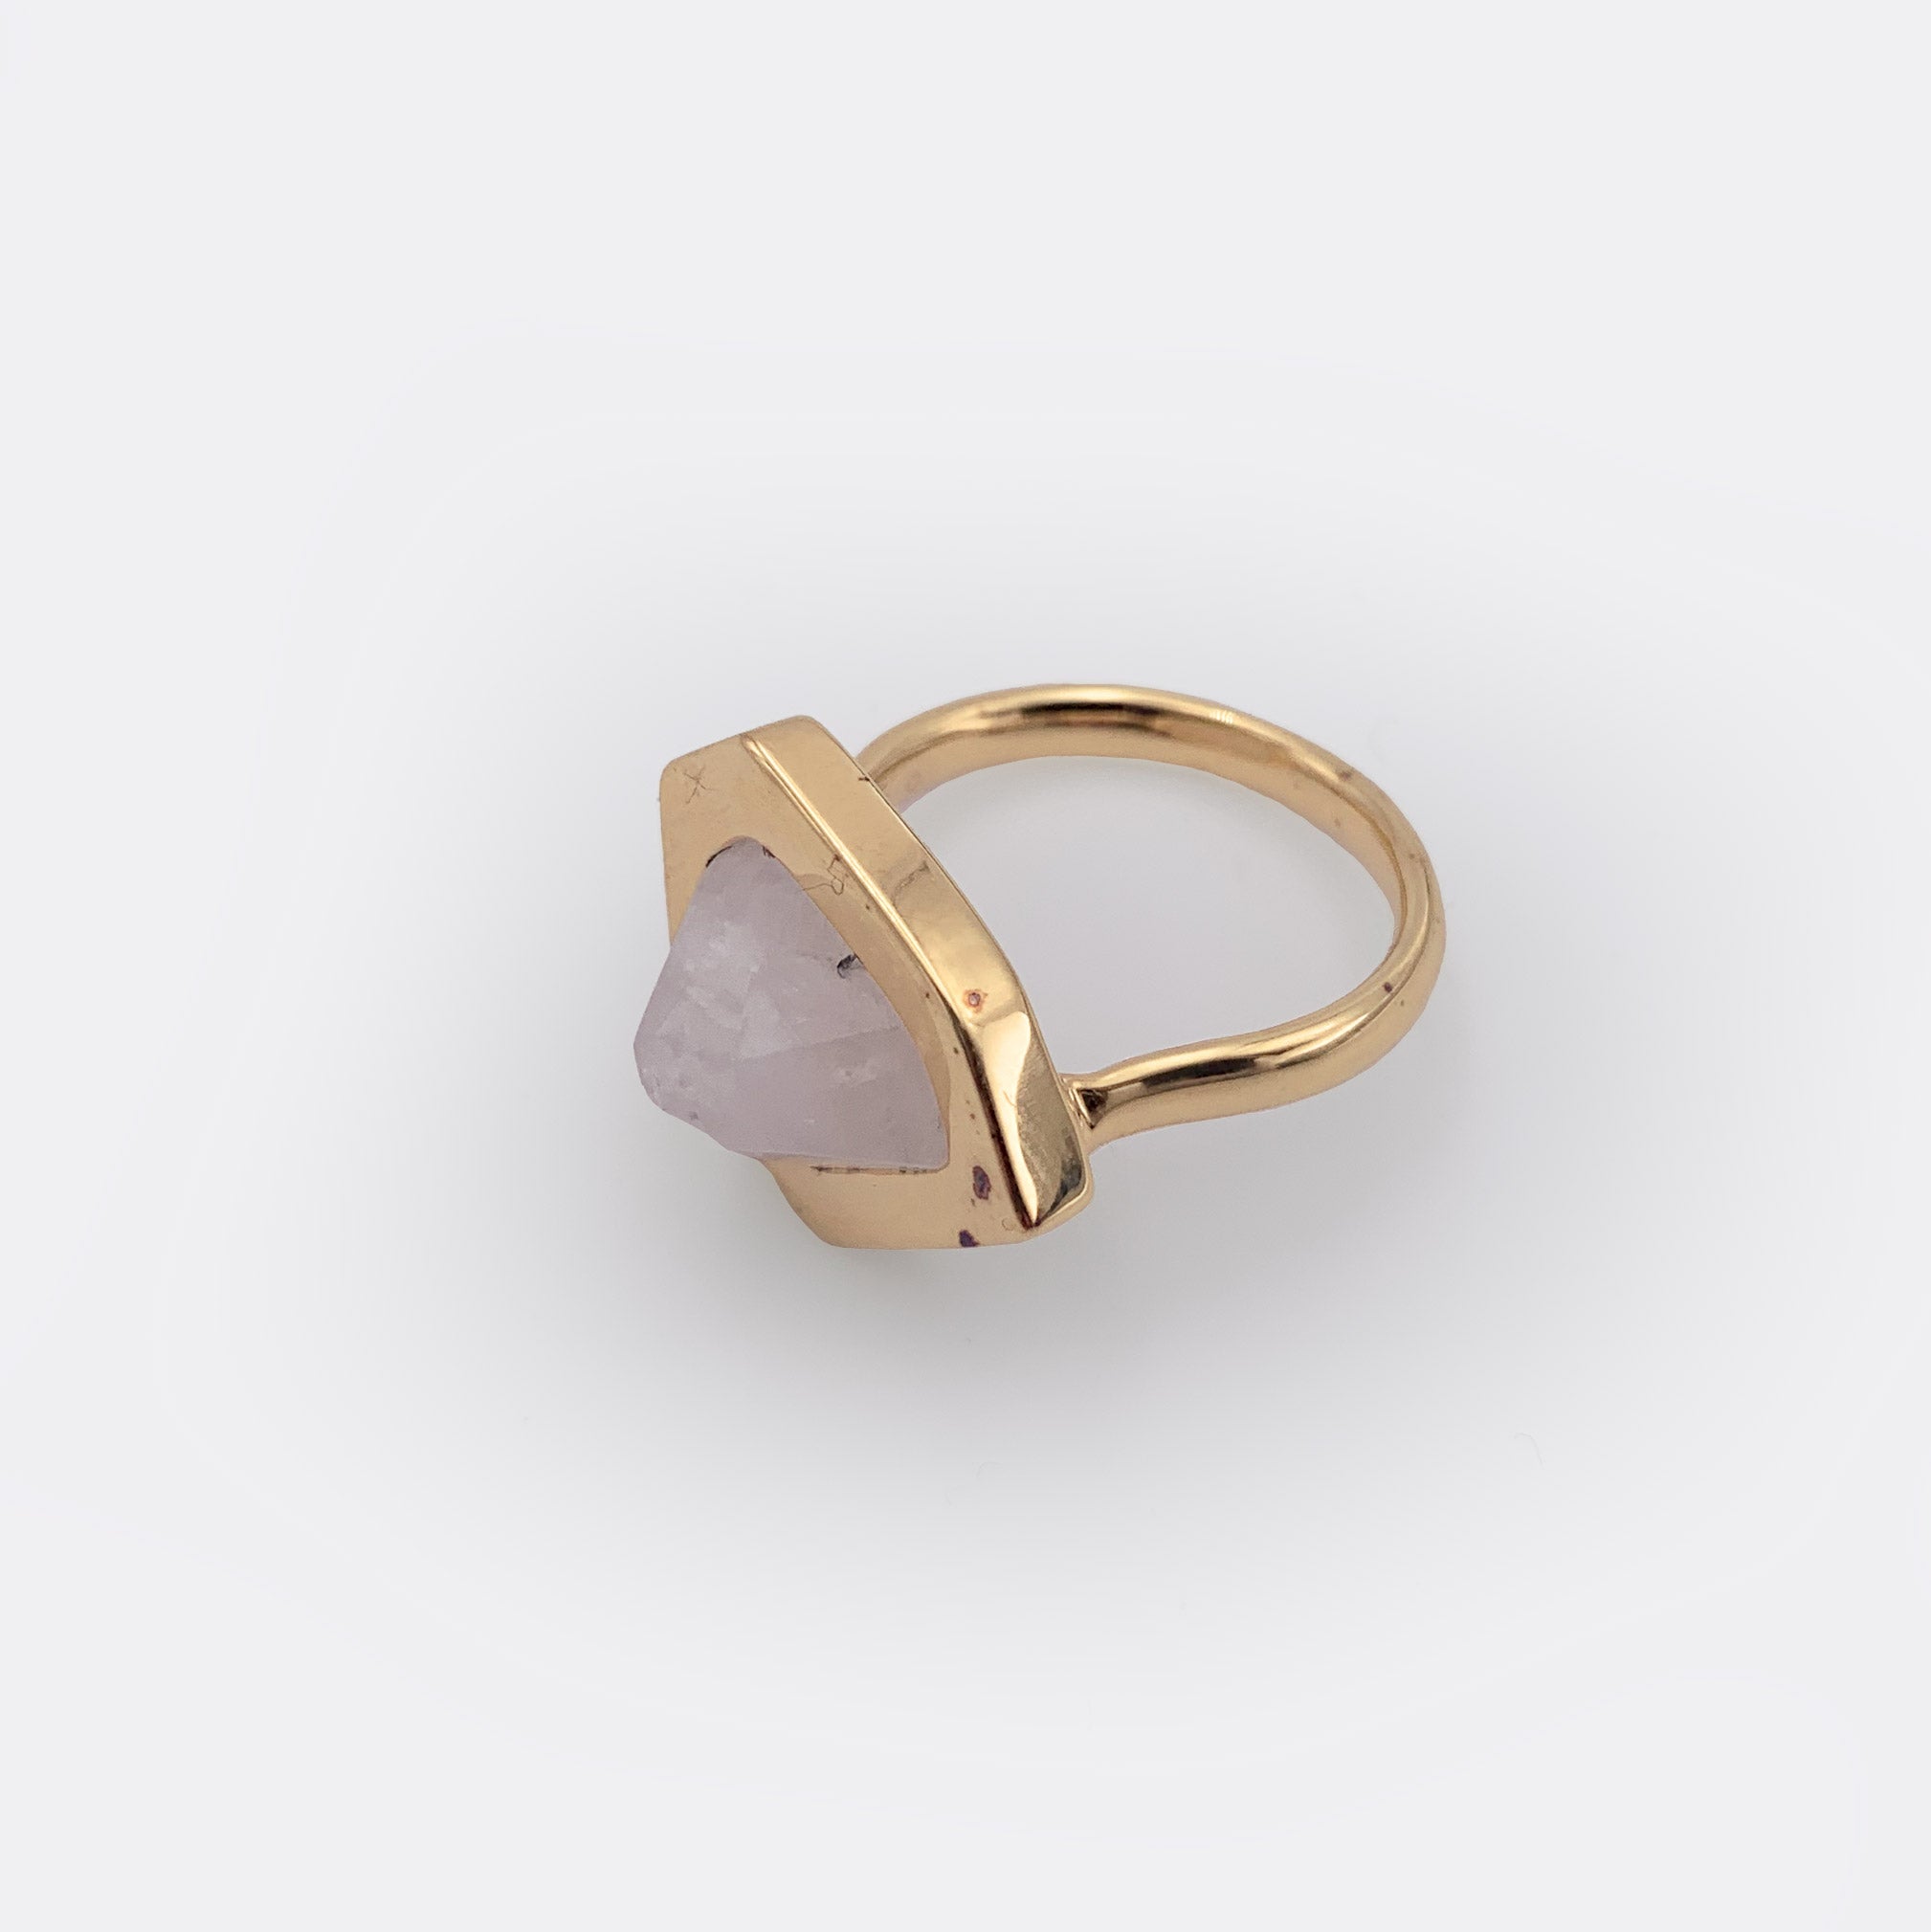 MONICA VINADER | Moon Ring | 925 Sterling Silver | 18ct Gold Plated